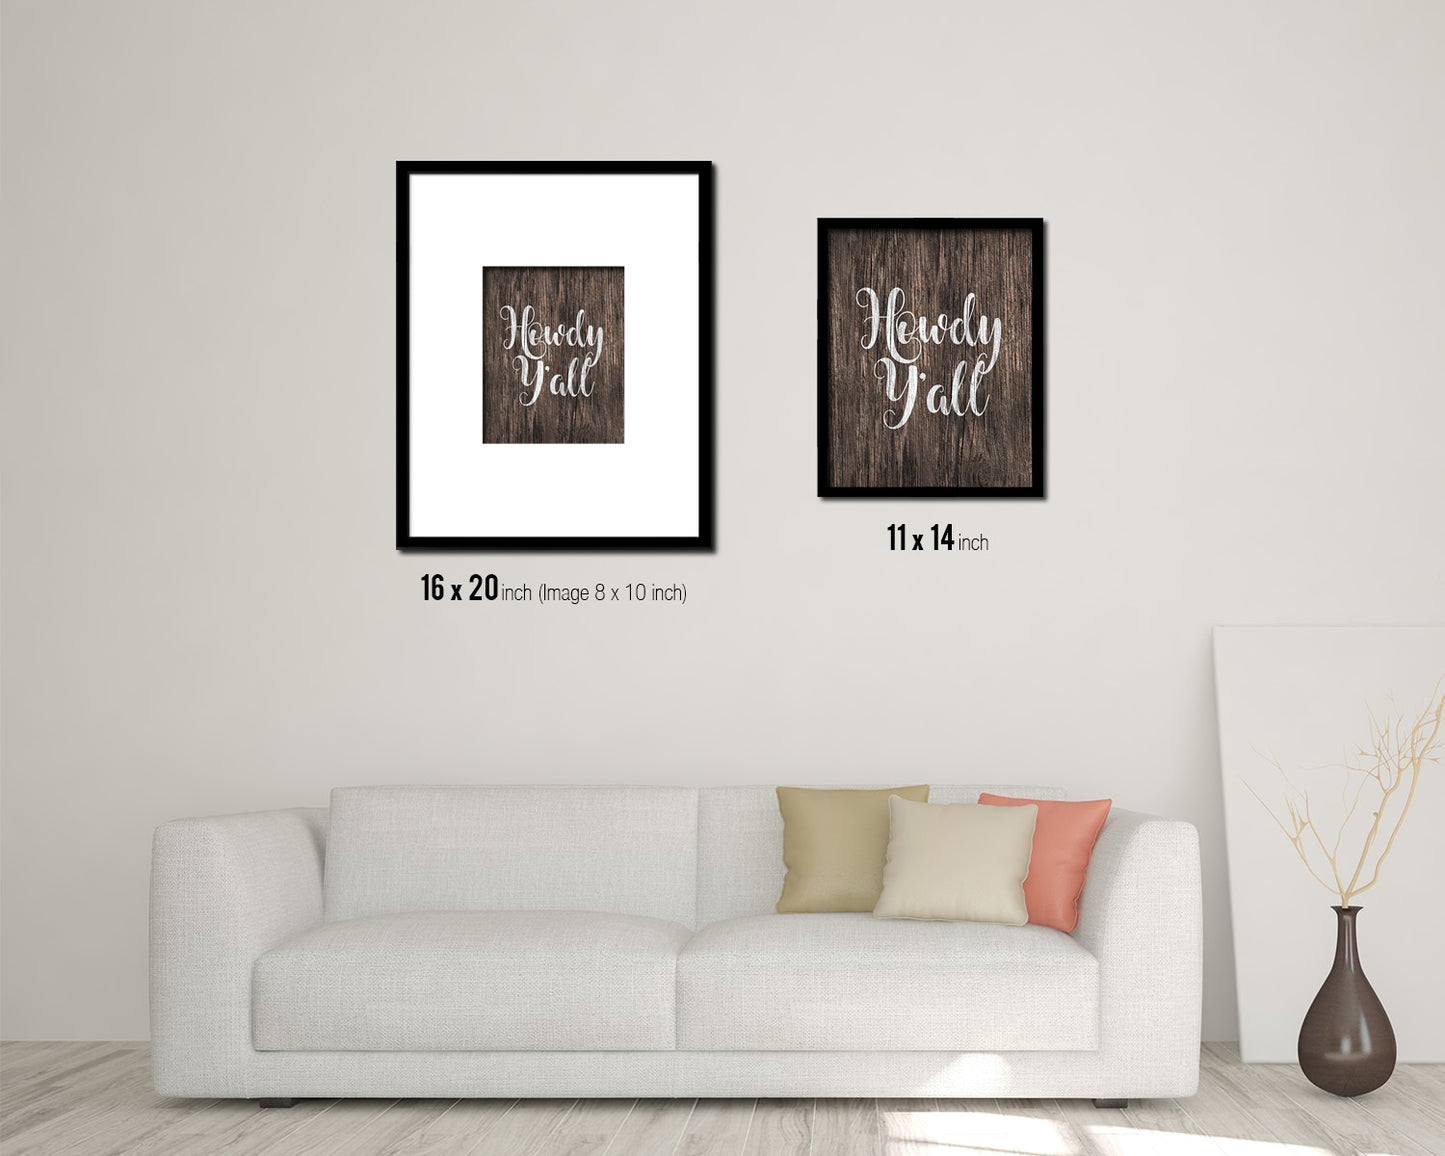 Howdy y'all Quote Framed Artwork Print Home Decor Wall Art Gifts